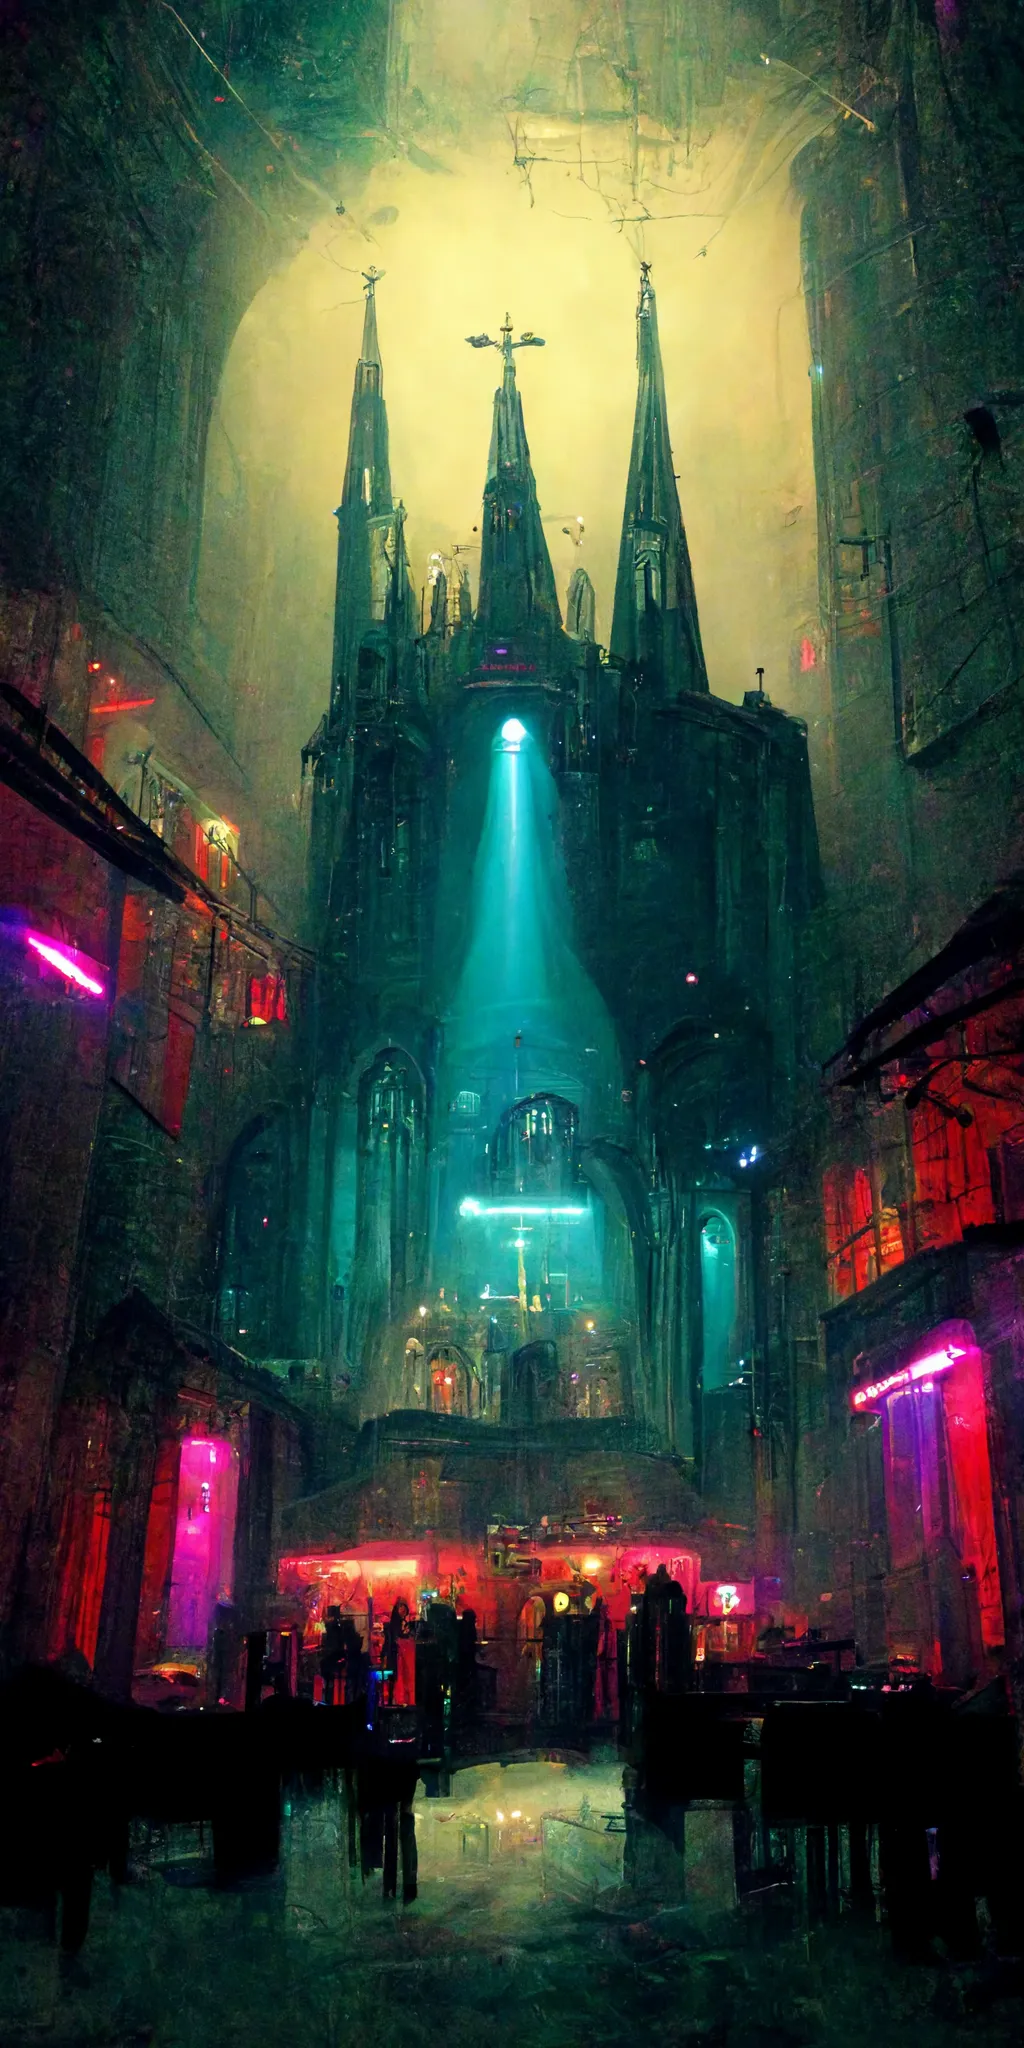 /_astro/kazbach_a_nightclub_in_an_old_cathedral_sci-fi_dystopian_realis_6b4505d0-62fc-4684-89fa-50dc26abd9e4.png.48fc33ec.webp